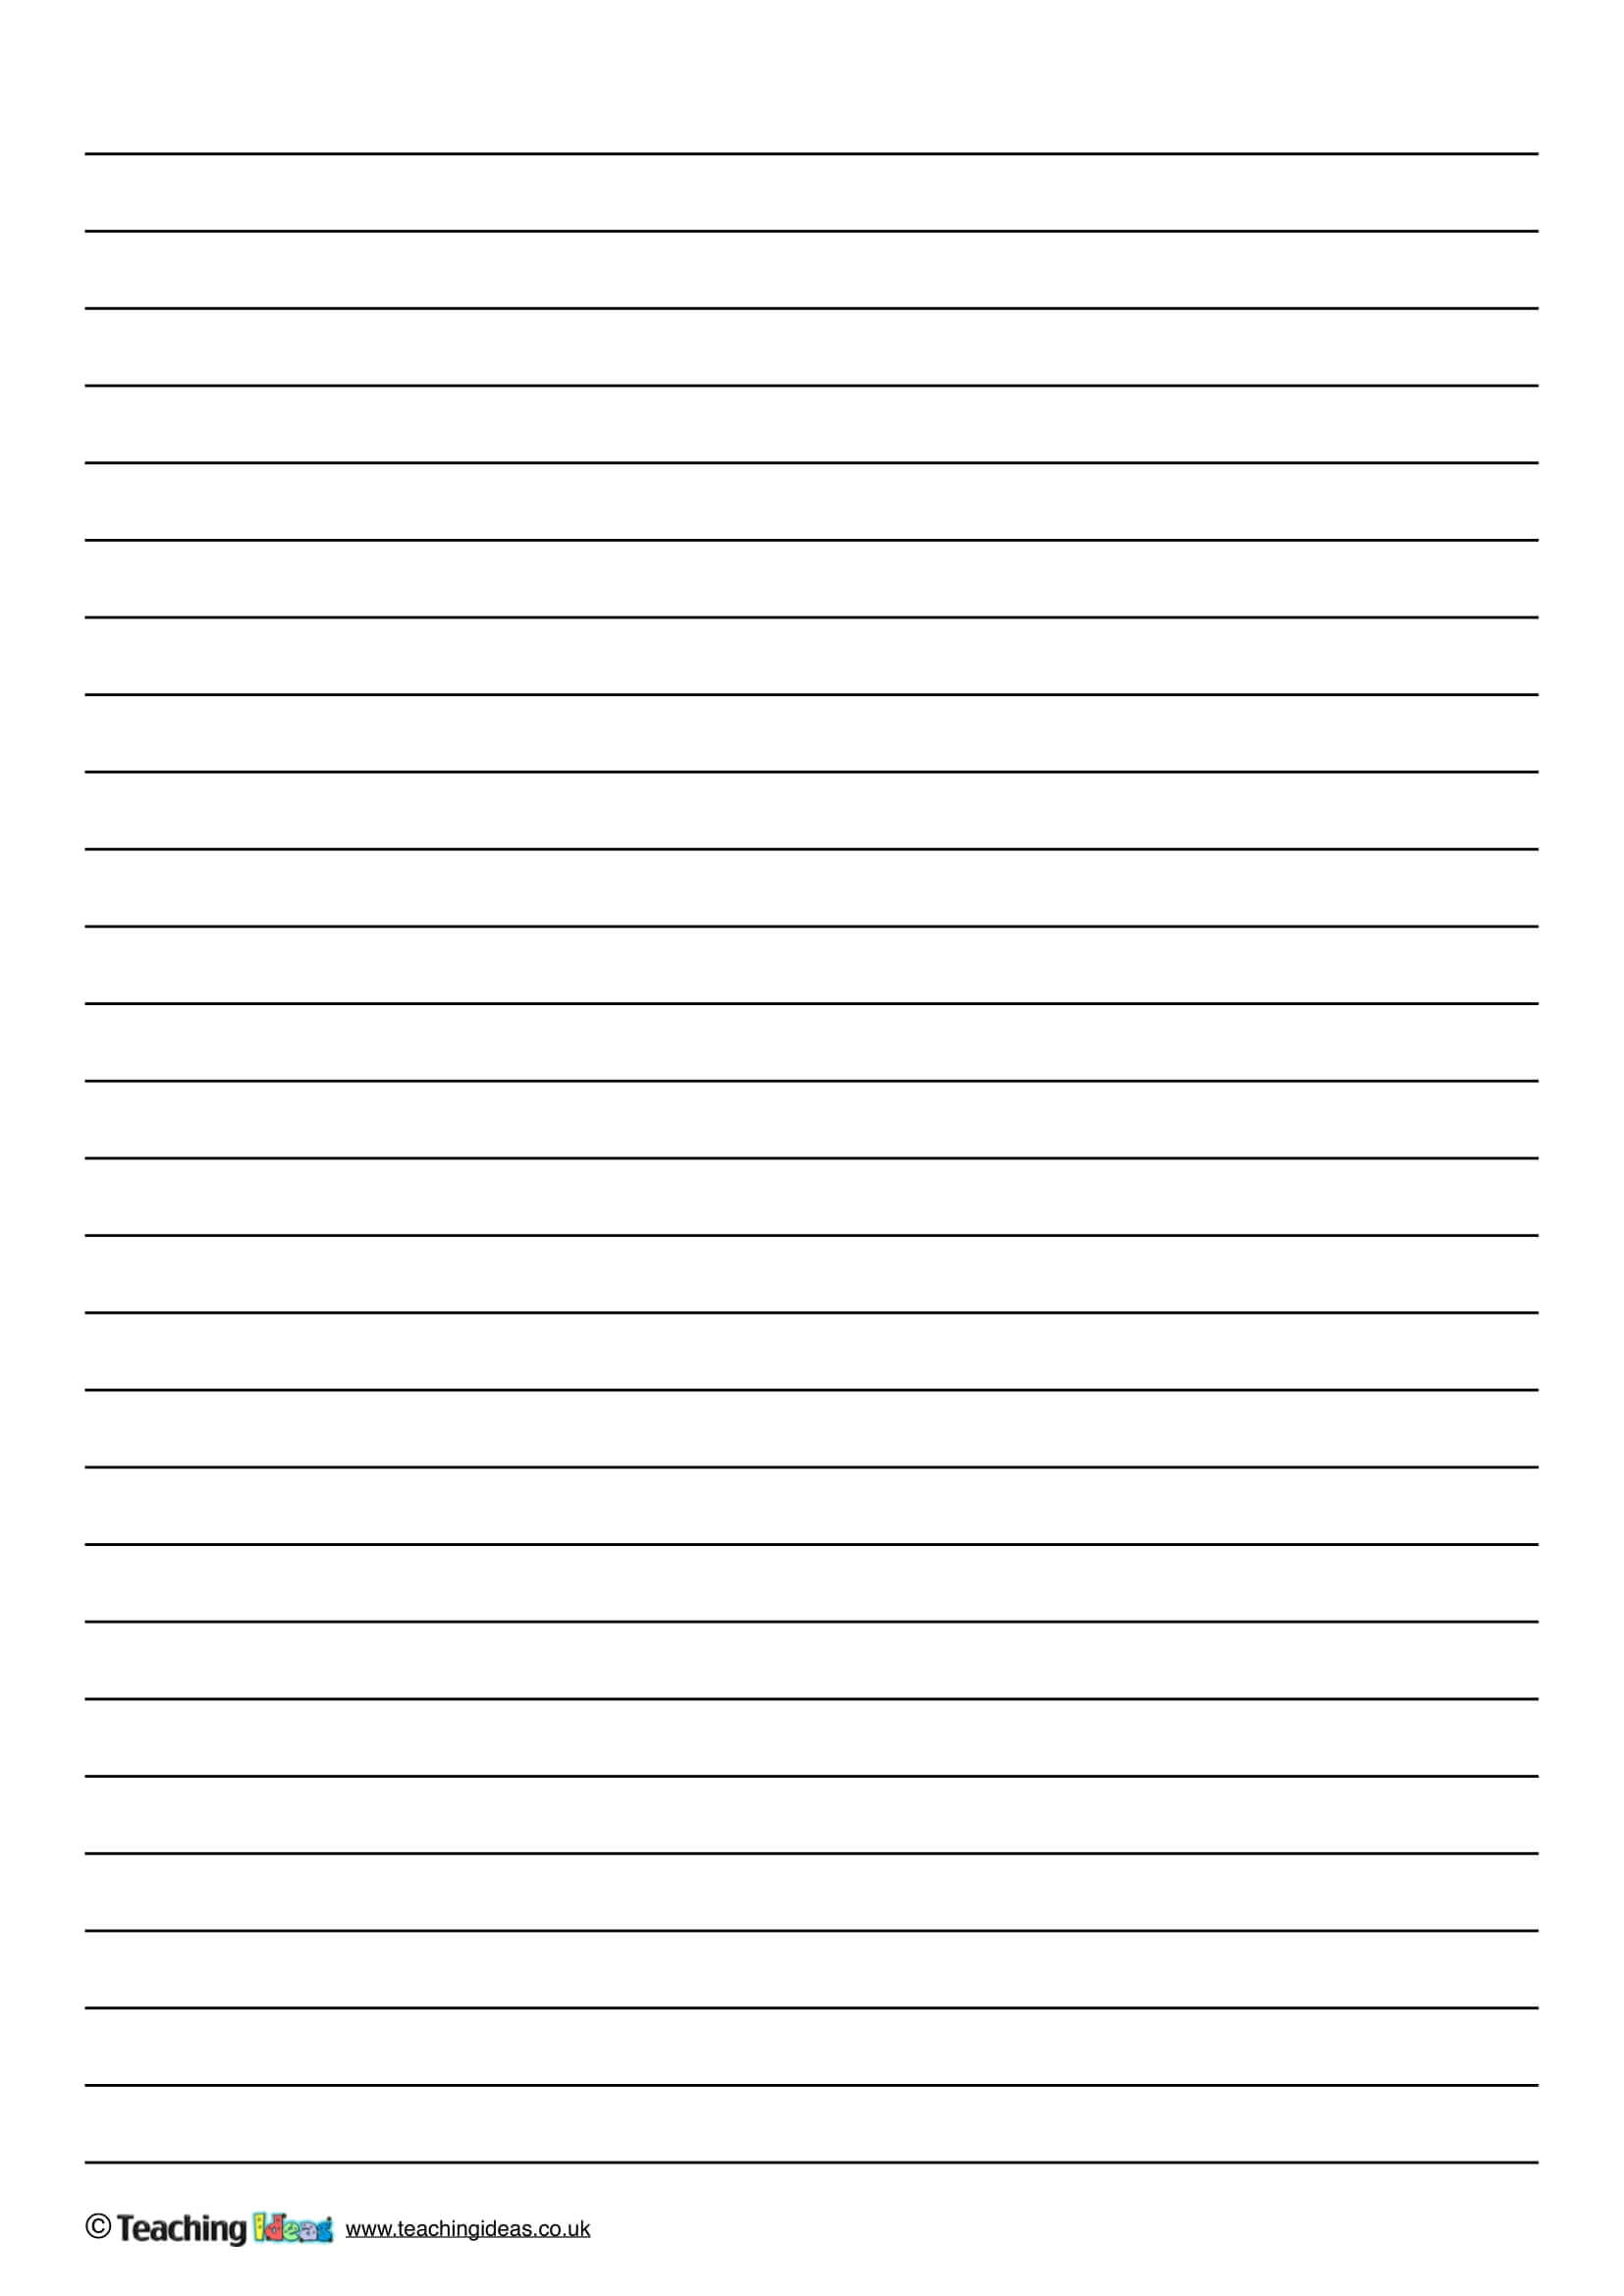 11+ Lined Paper Templates - Pdf | Free & Premium Templates Inside Notebook Paper Template For Word